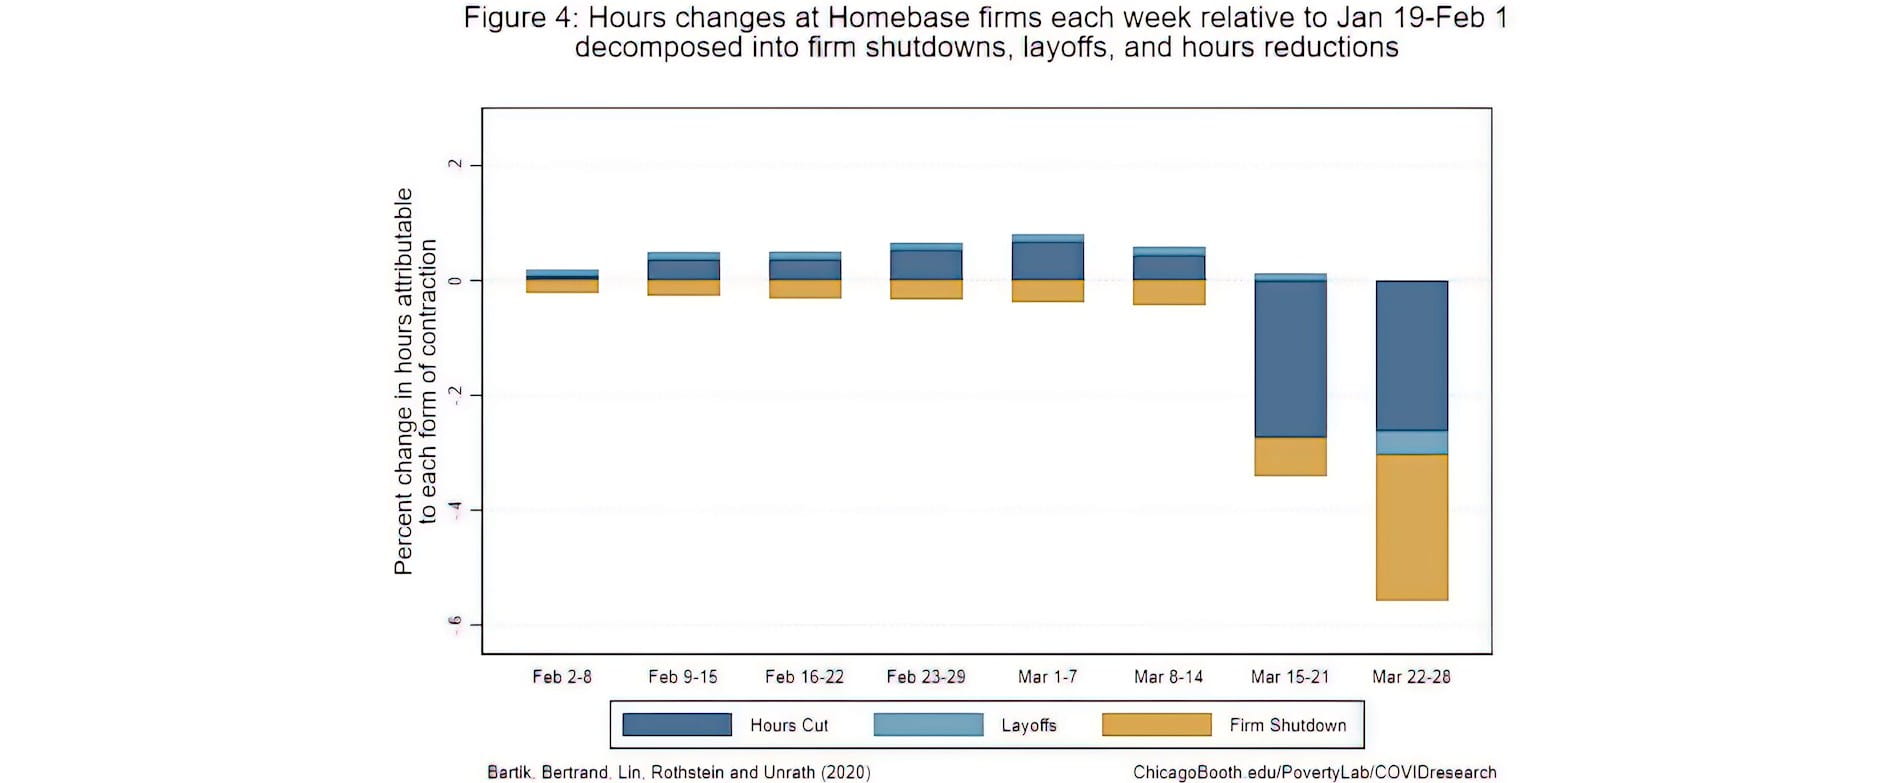 Figure 4: Hours changes at Homebase firms each week relative to Jan 19-Feb 1